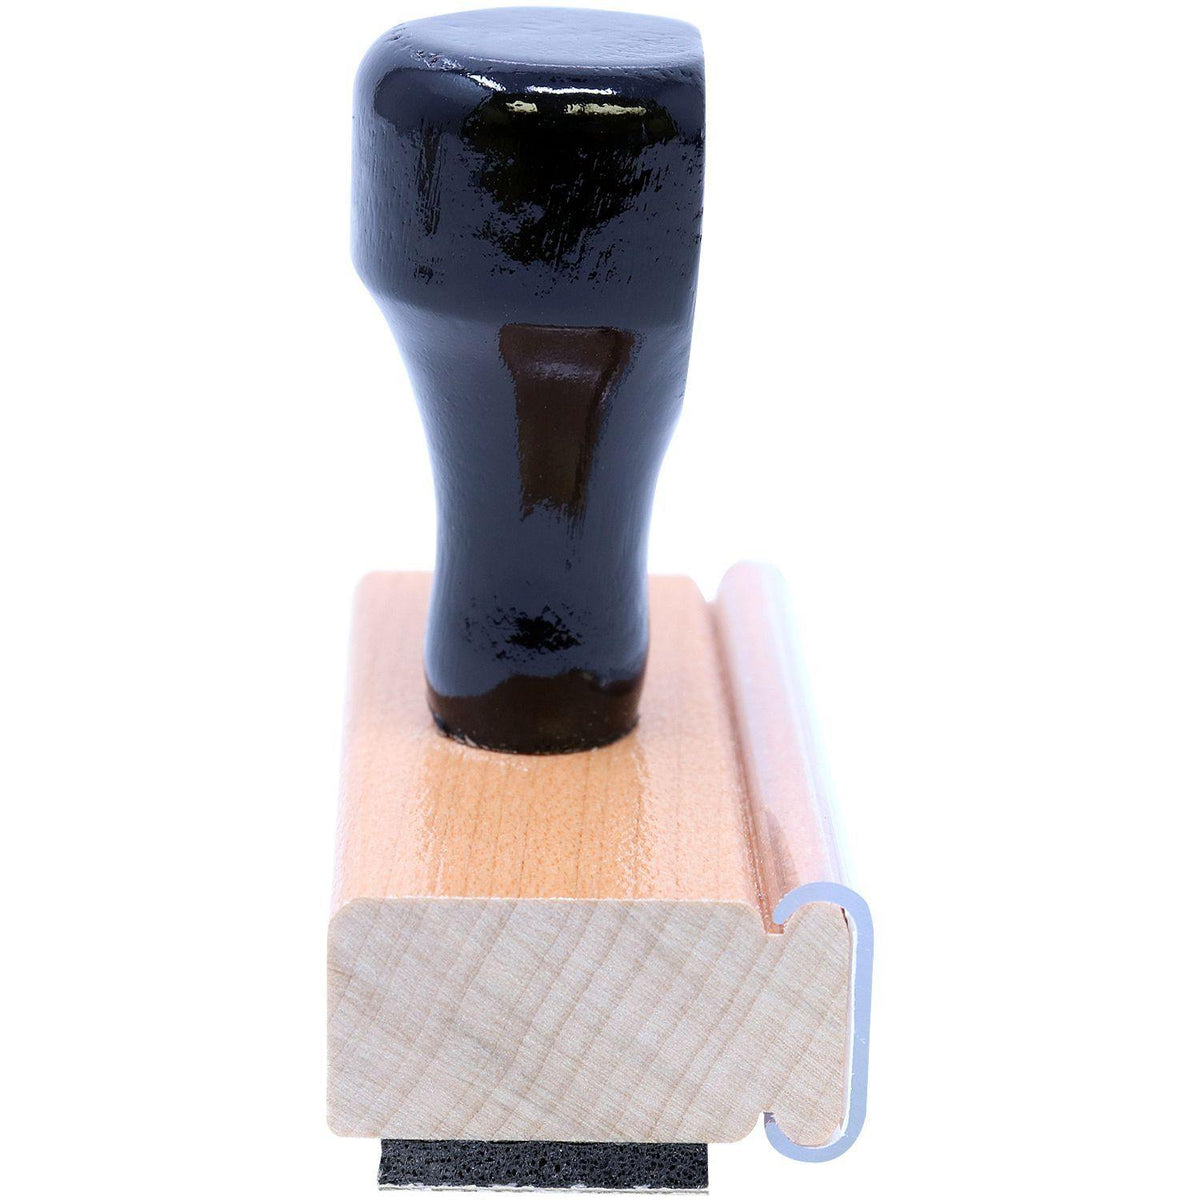 Large Sign Date Rubber Stamp - Engineer Seal Stamps - Brand_Acorn, Impression Size_Large, Stamp Type_Regular Stamp, Type of Use_Office, Type of Use_Professional, Type of Use_Teacher